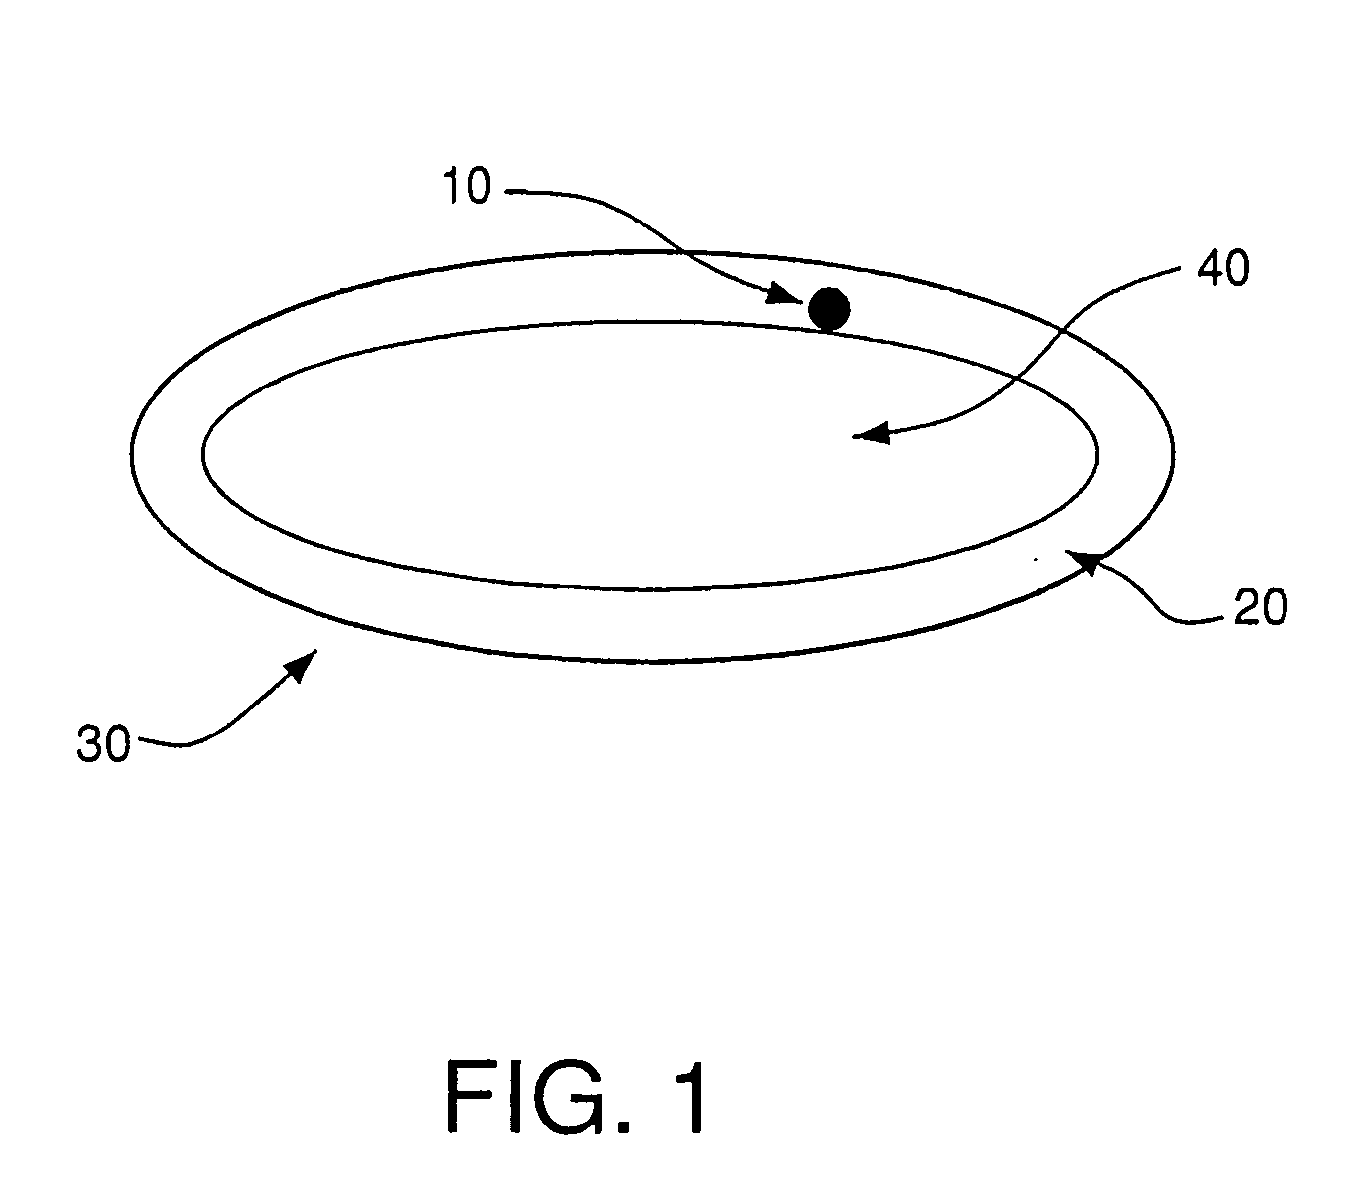 Optical guidance system for invasive catheter placement